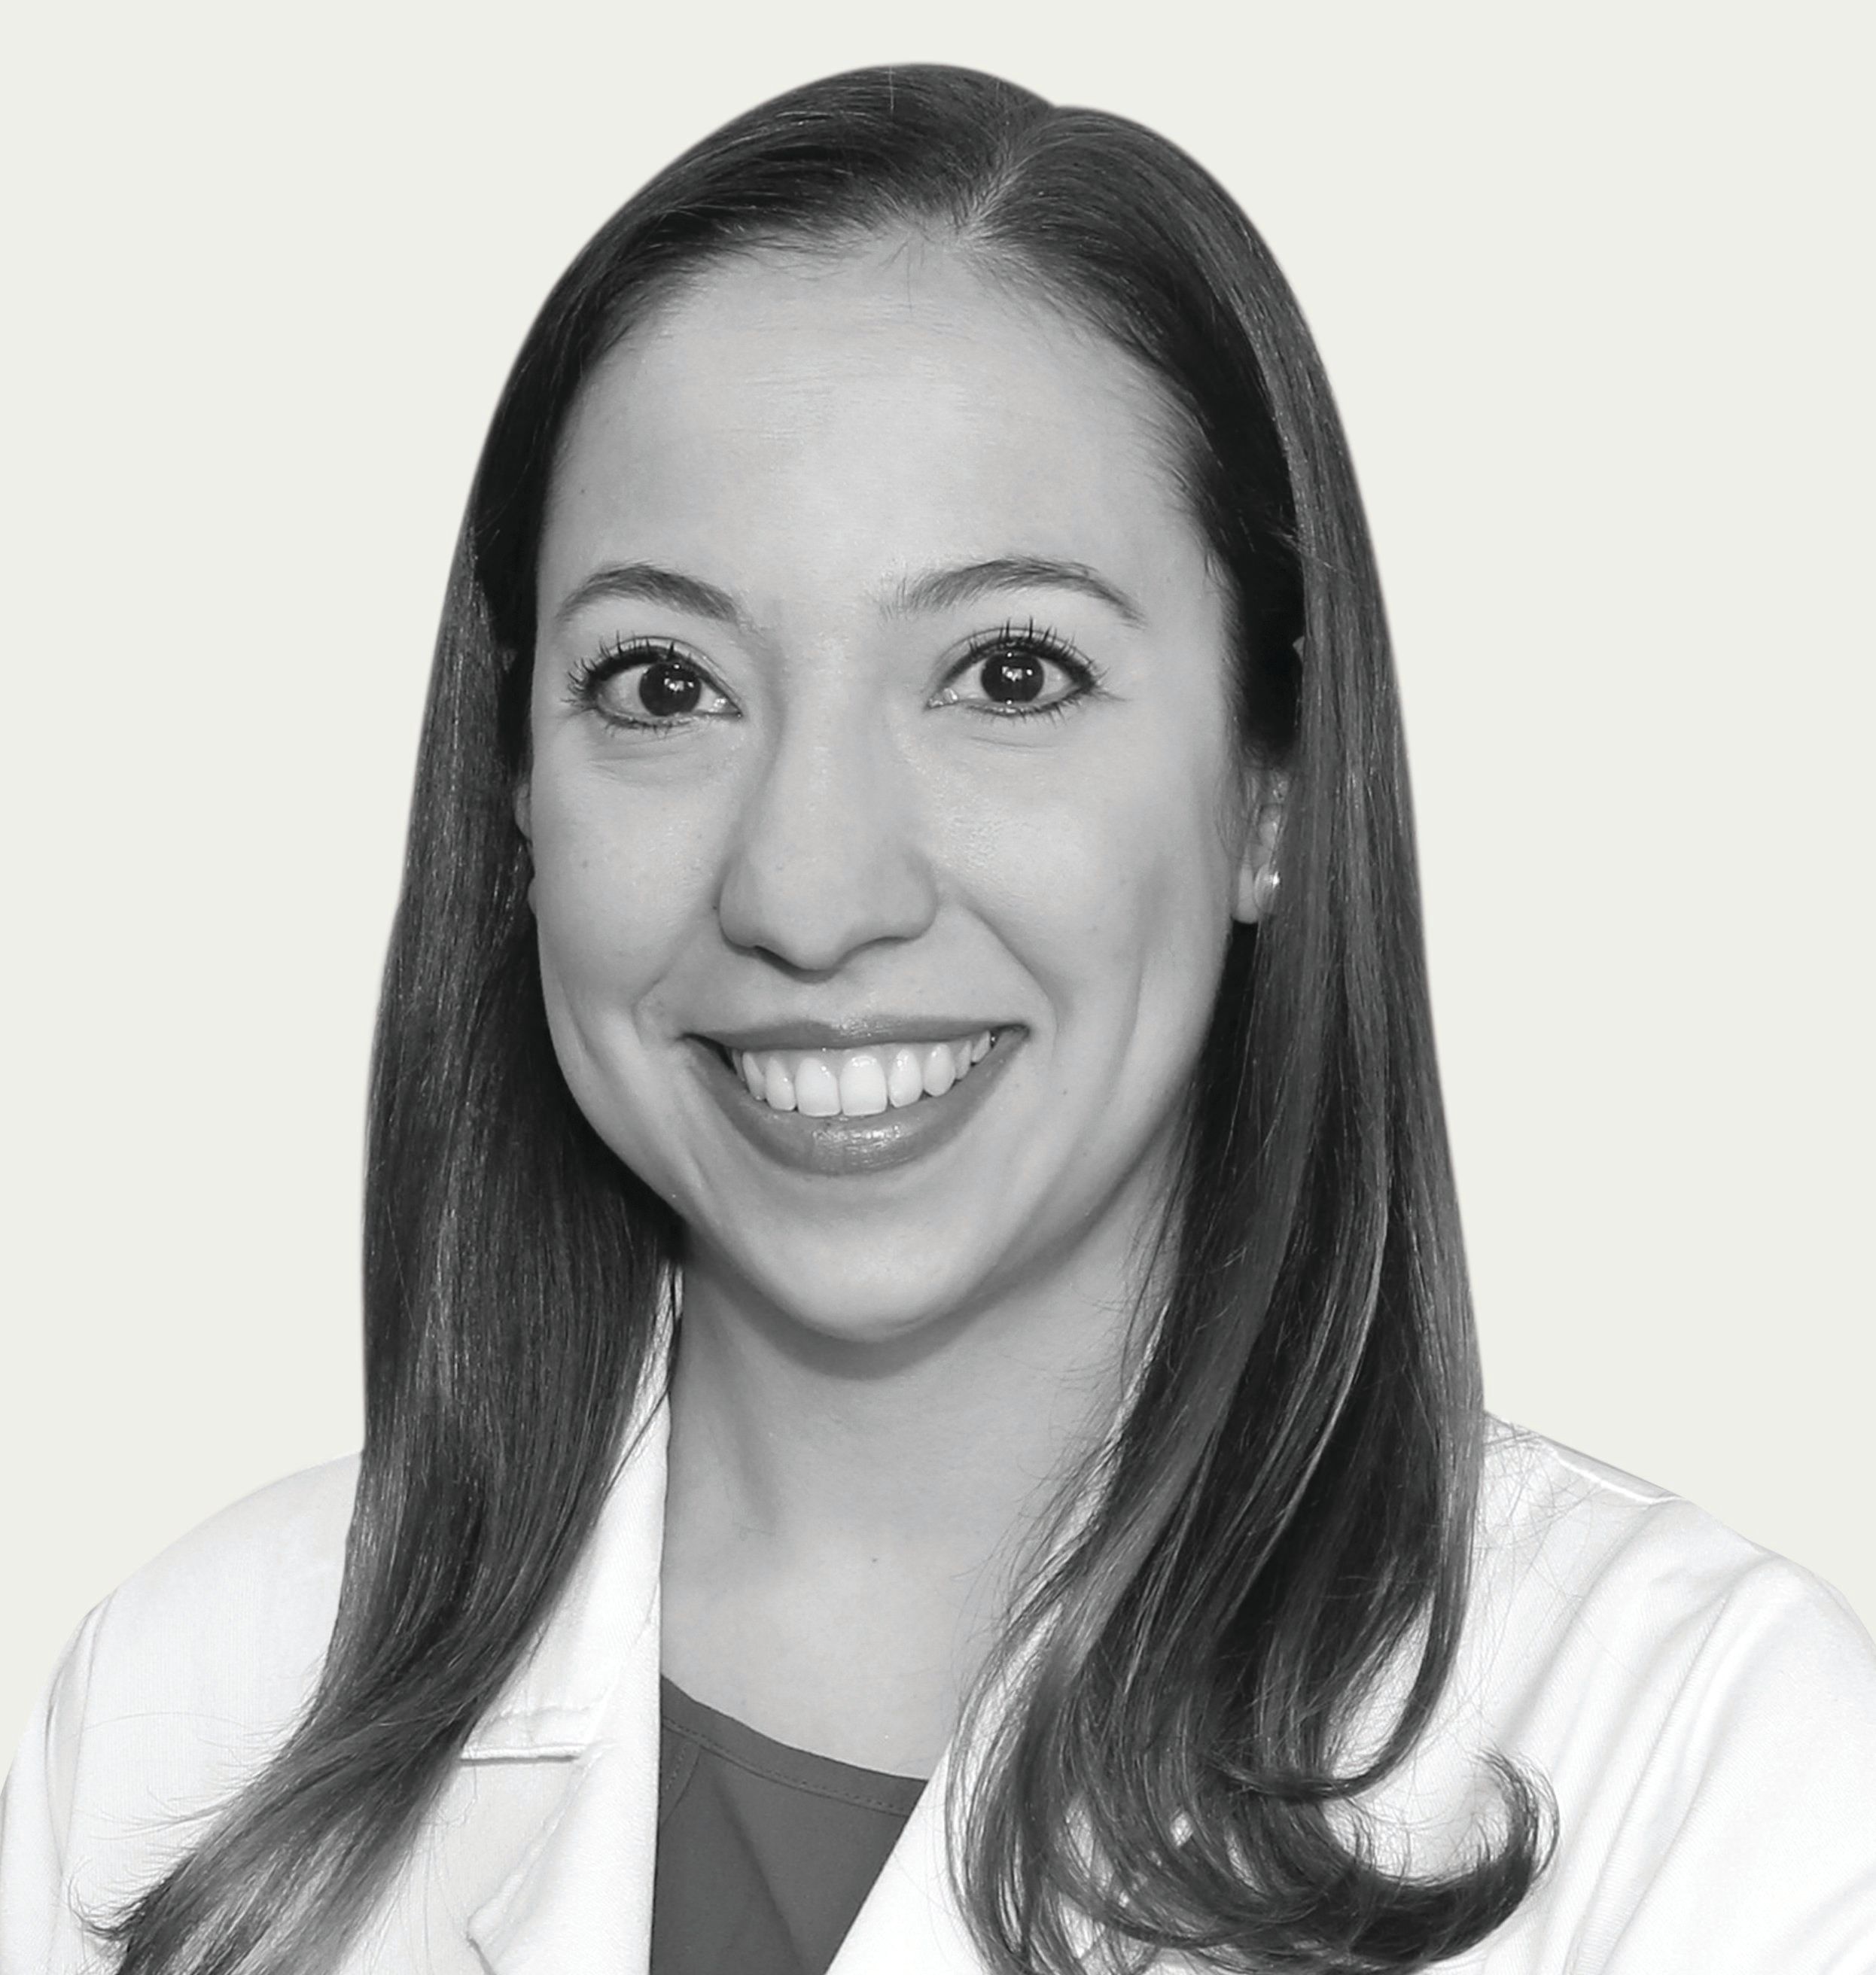 Bourlon is an associate professor and head of the Urologic Oncology Clinic, National Researcher. Instituto Nacional de Ciencias Médicas y Nutrición Salvador Zubirán. Mexico City, Mexico. She is also a member of the American Society of Clinical Oncology’s IDEA Working Group.